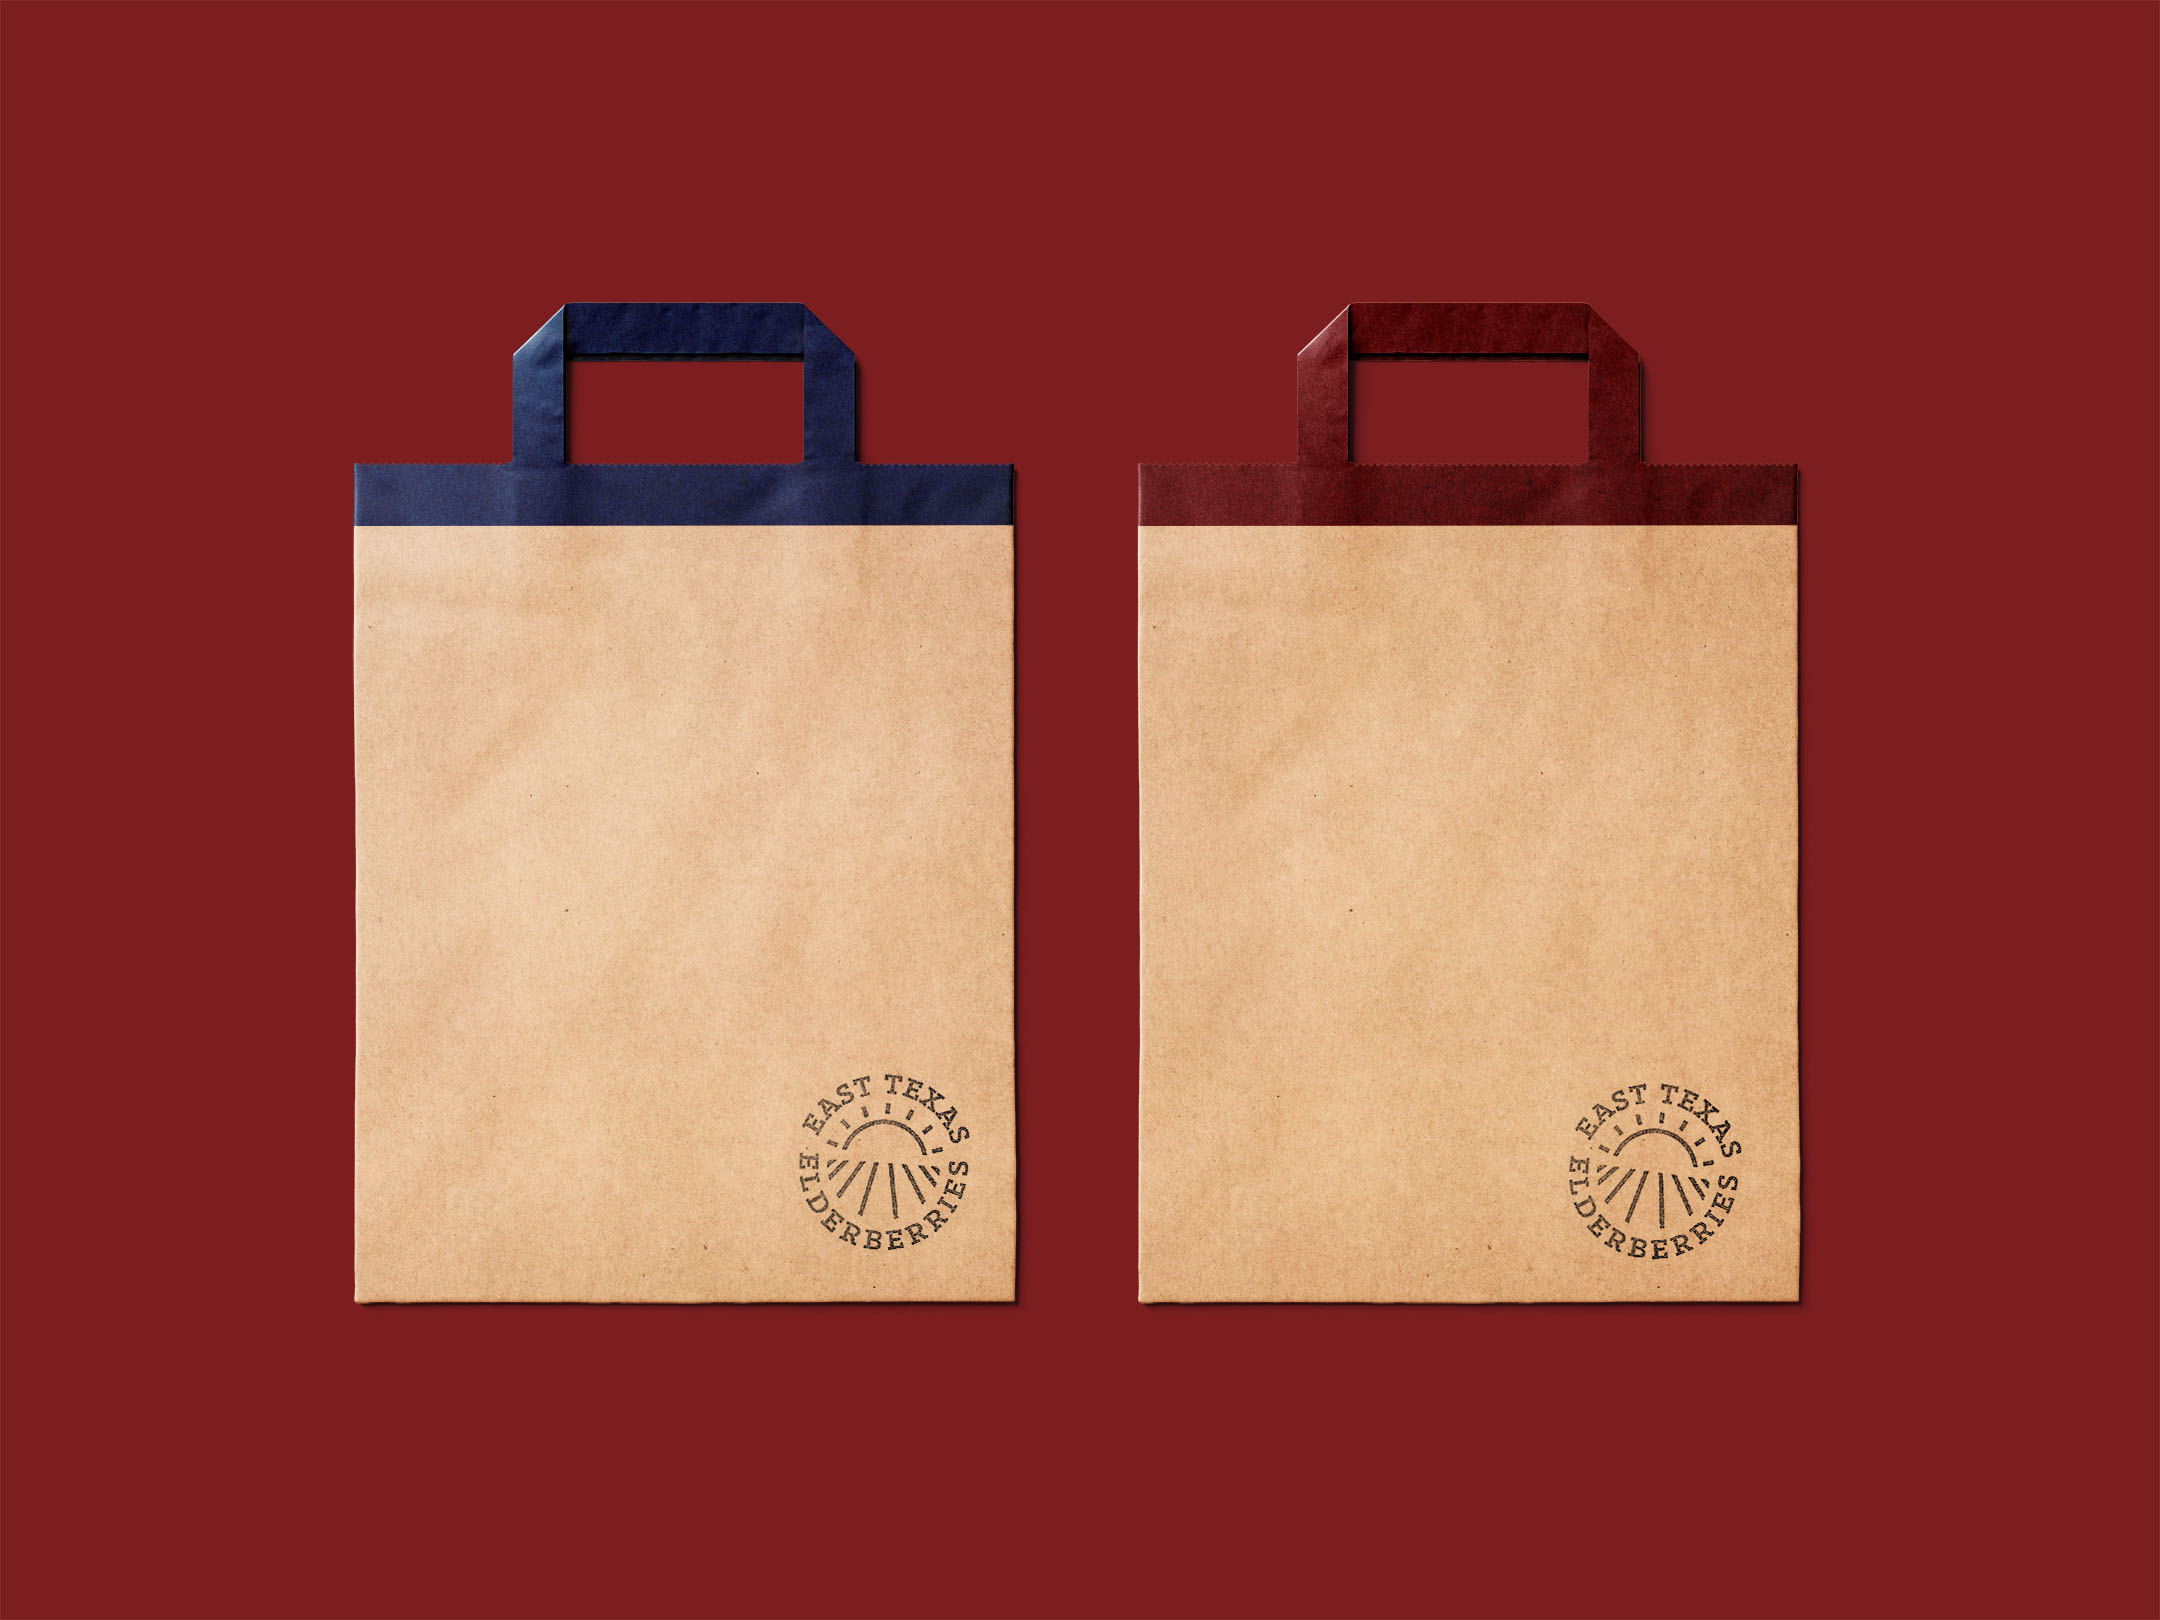 Two shopping bags sporting the East Texas Elderberries seal